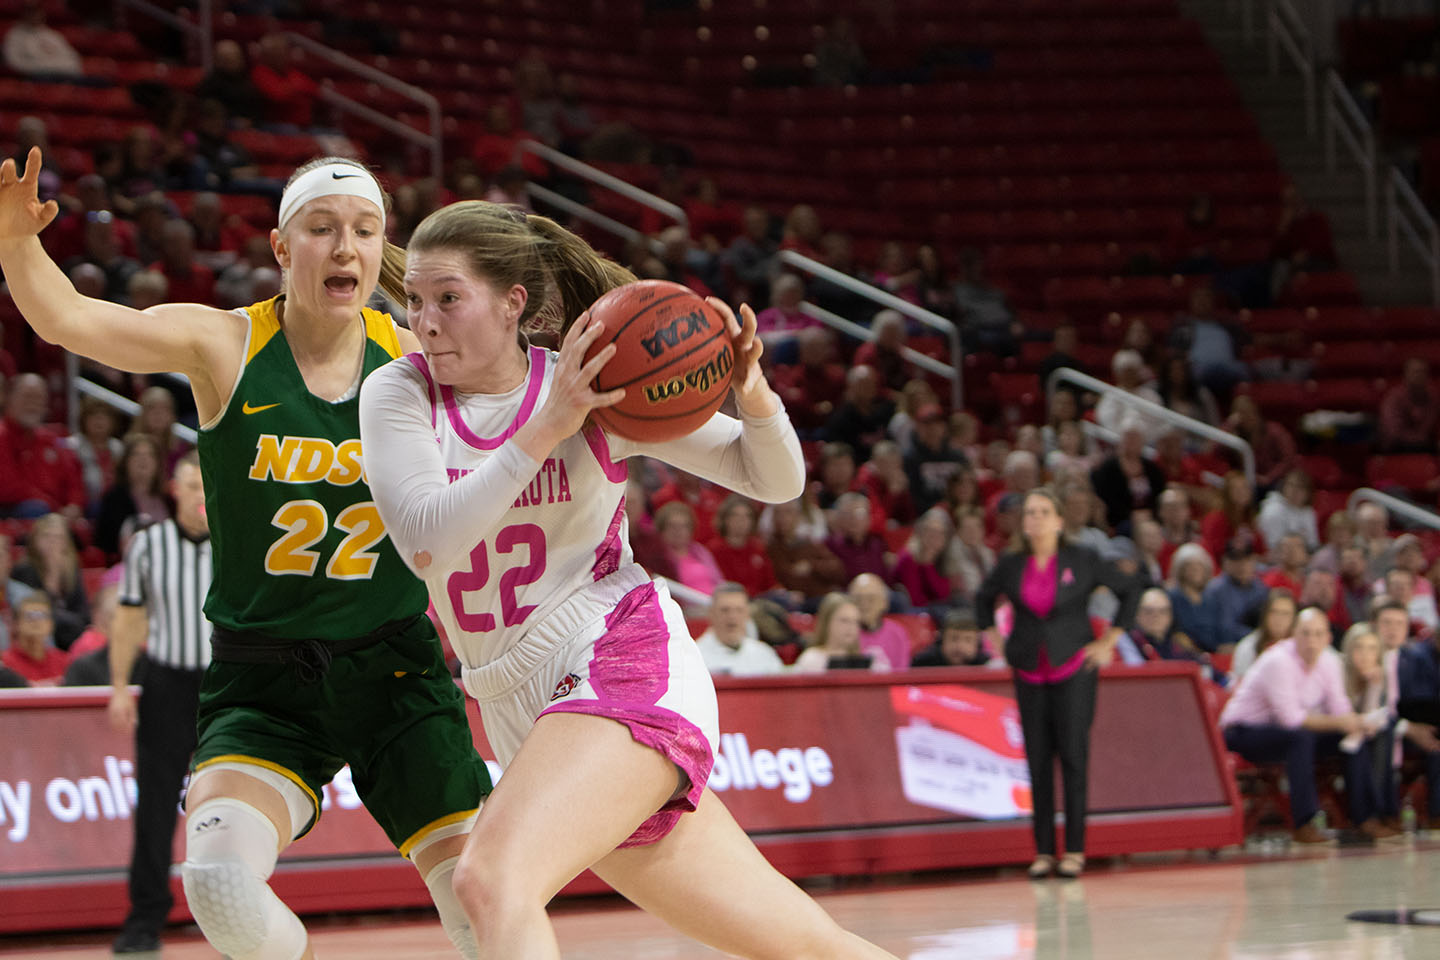 Coyotes cruise past Bison; remain perfect in conference play